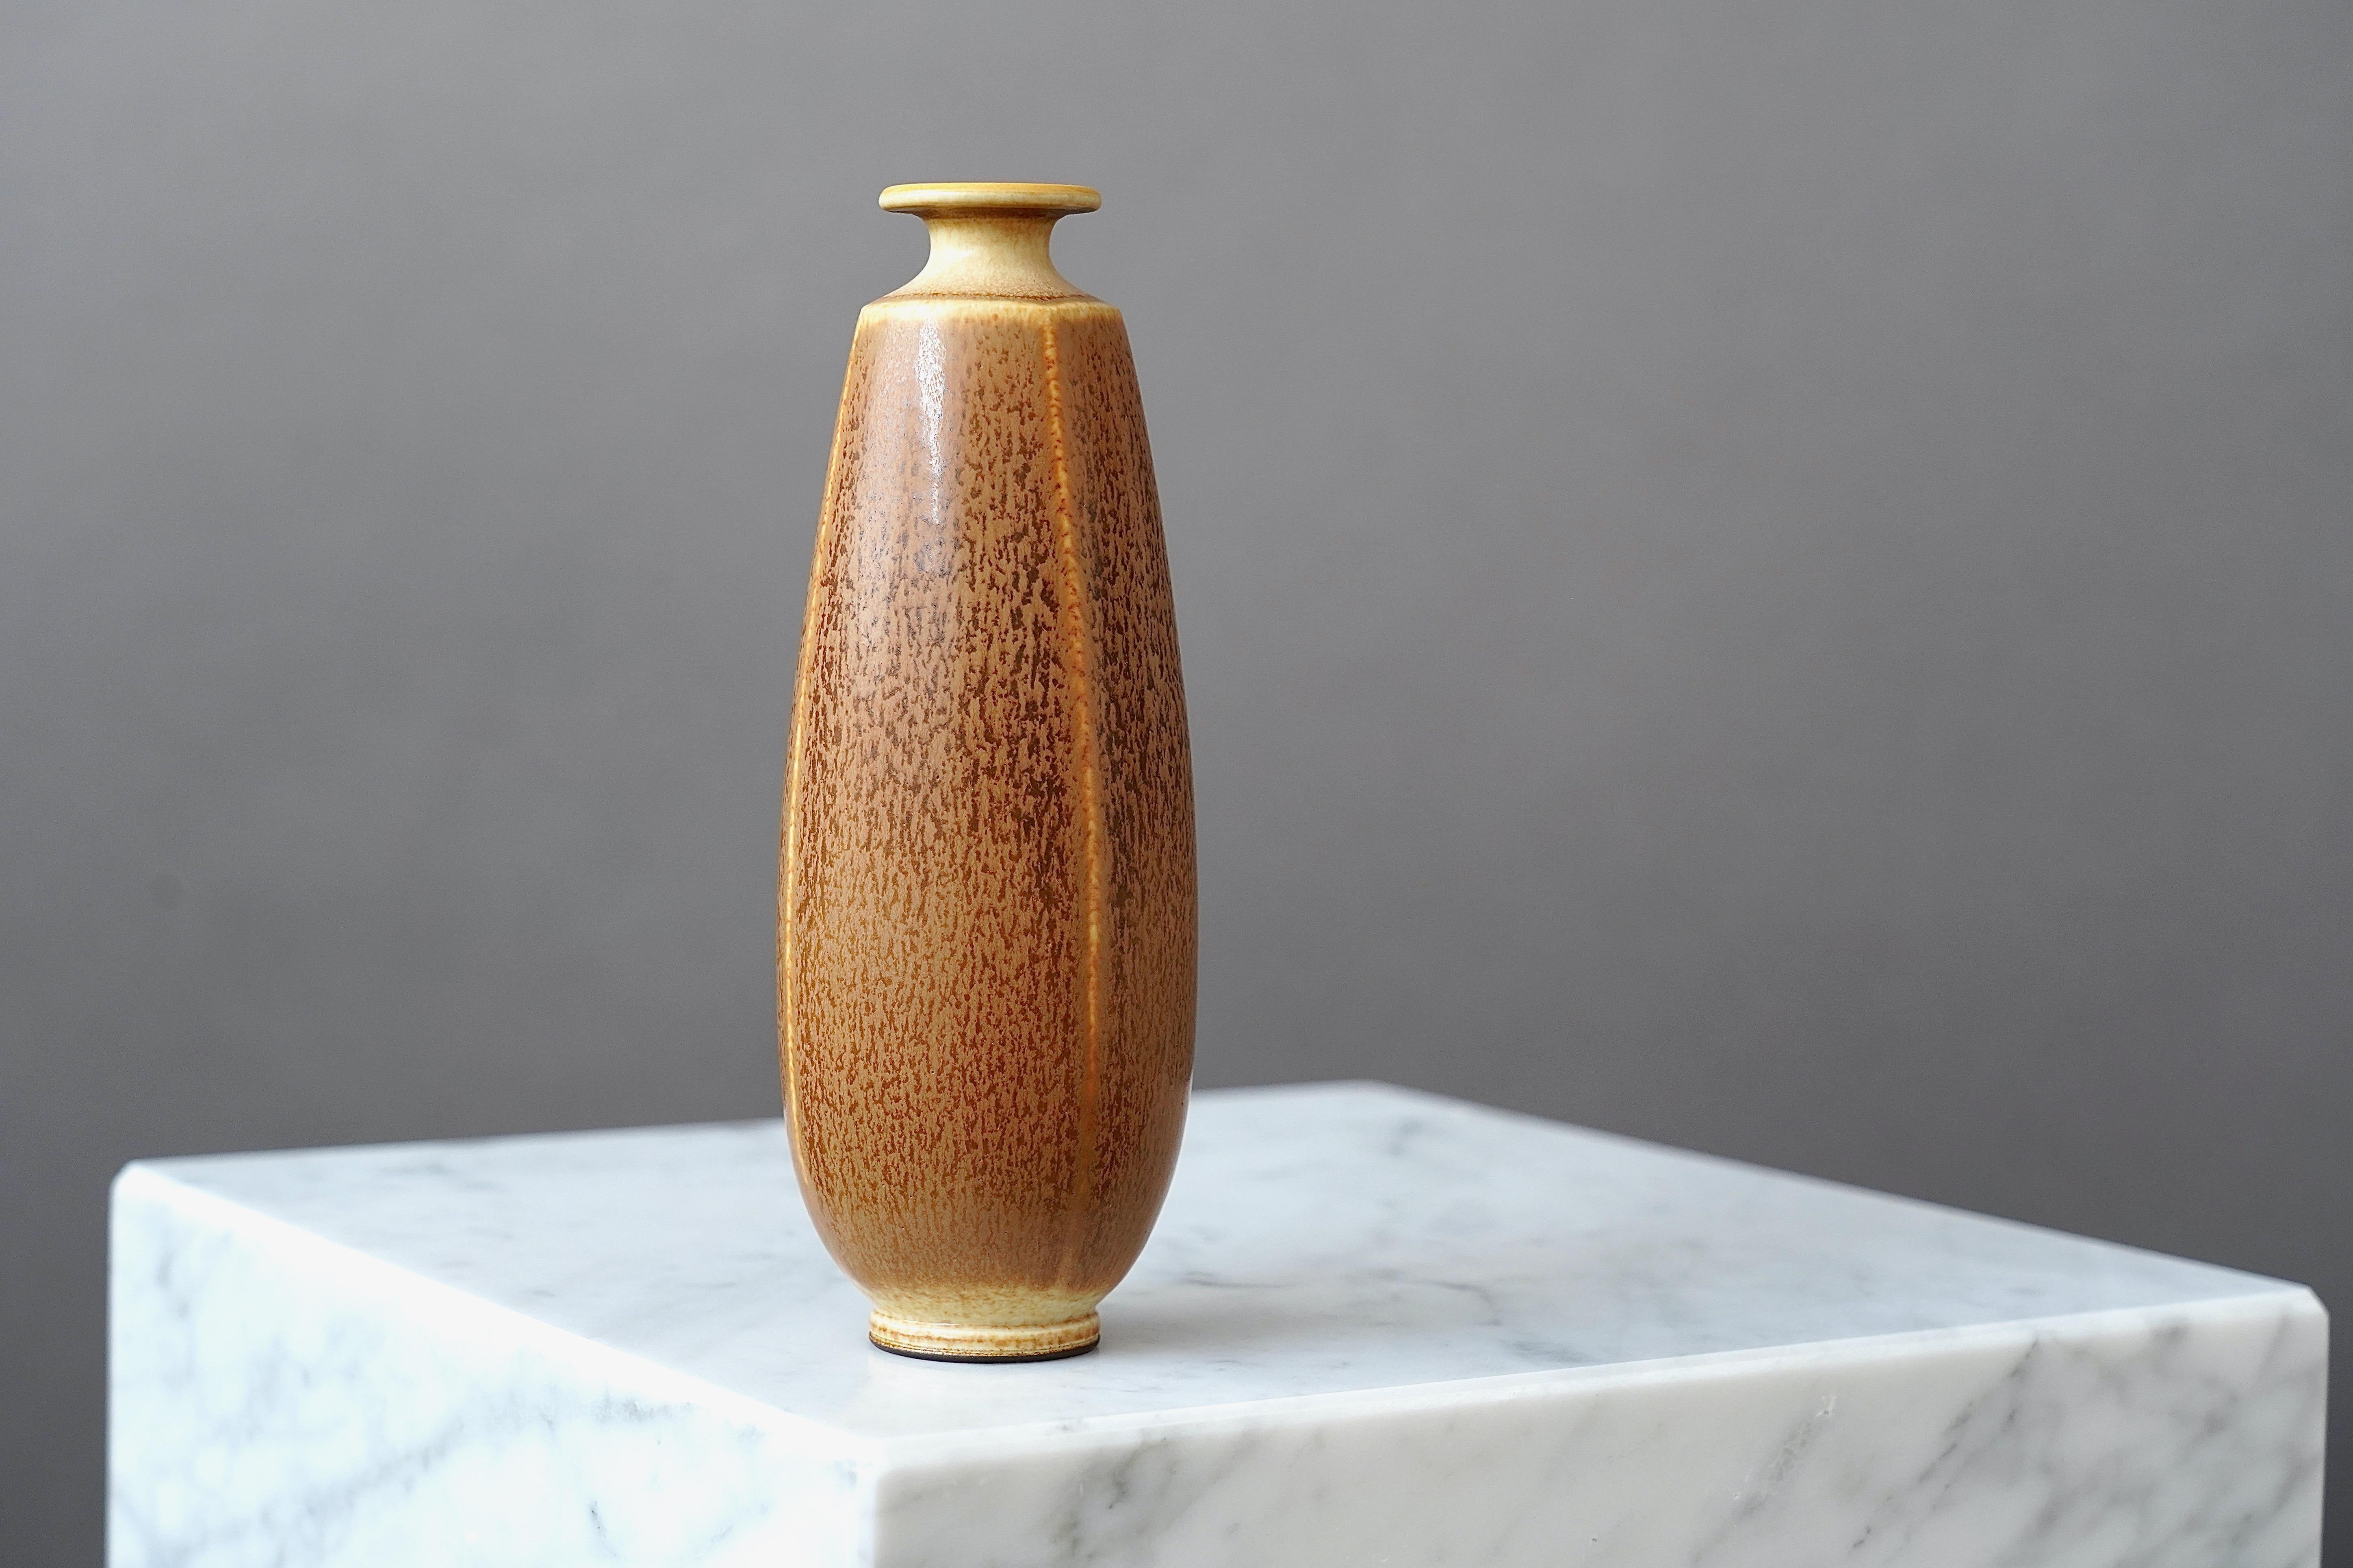 A beautiful stoneware vase with amazing hare’s fur glaze. 
Made by master thrower Berndt Friberg, in the artist's studio at Gustavsberg, Sweden.

Excellent condition. Incised signature 